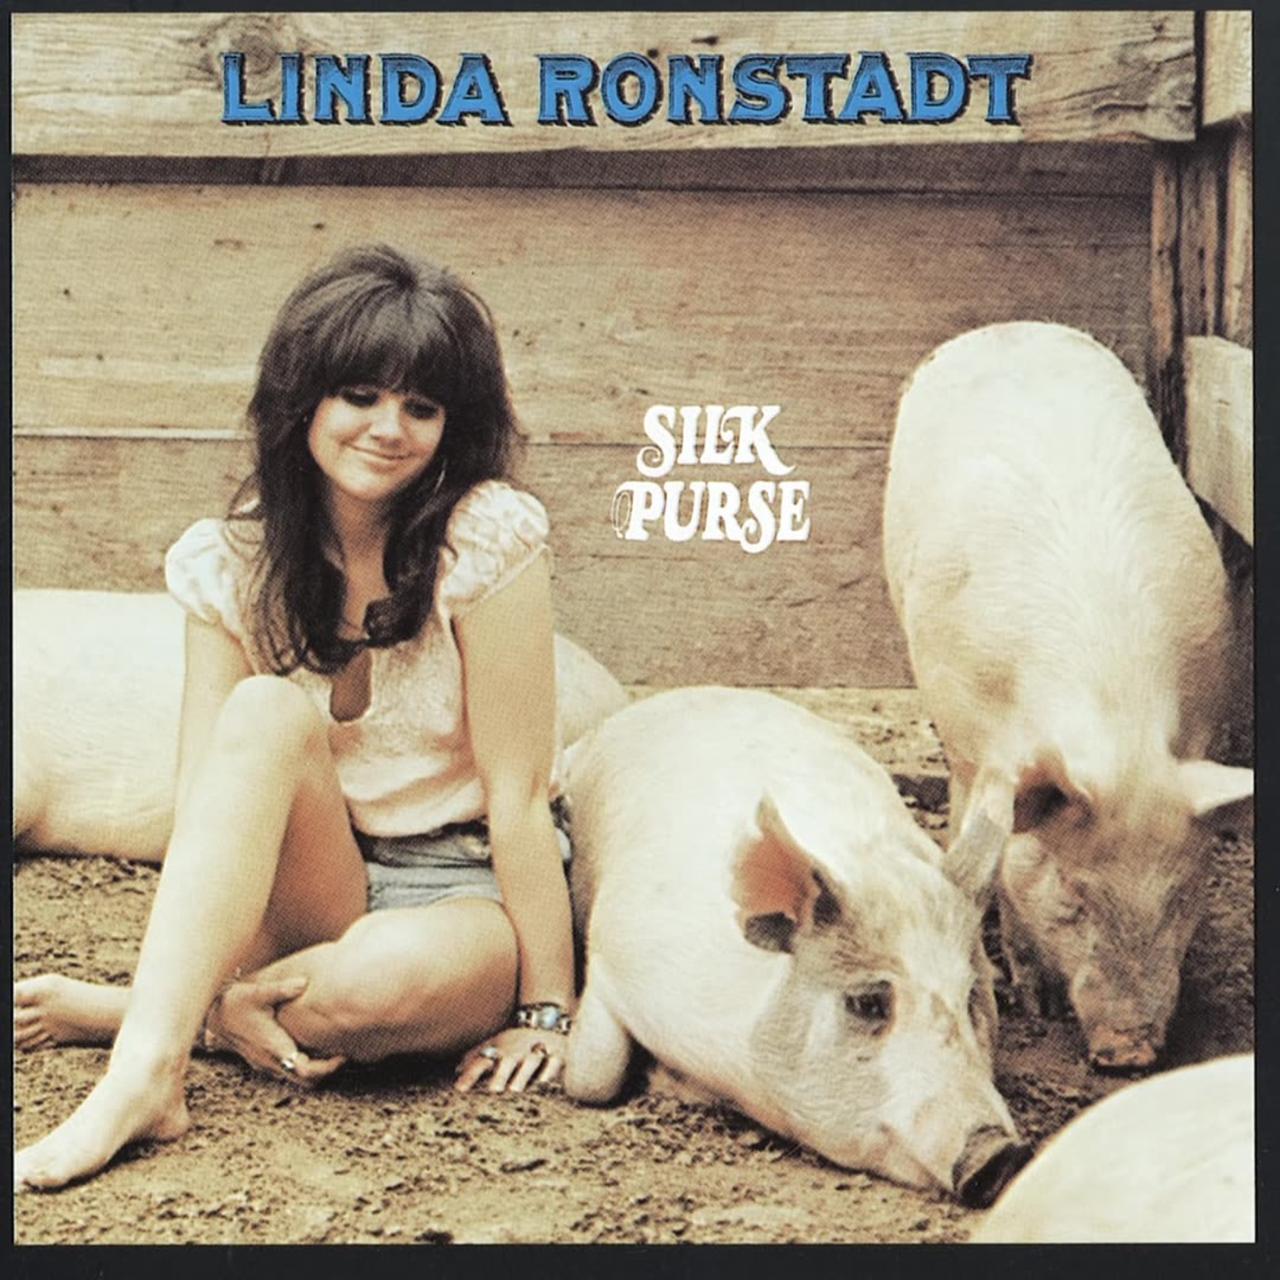 Long Long Time by Linda Ronstadt